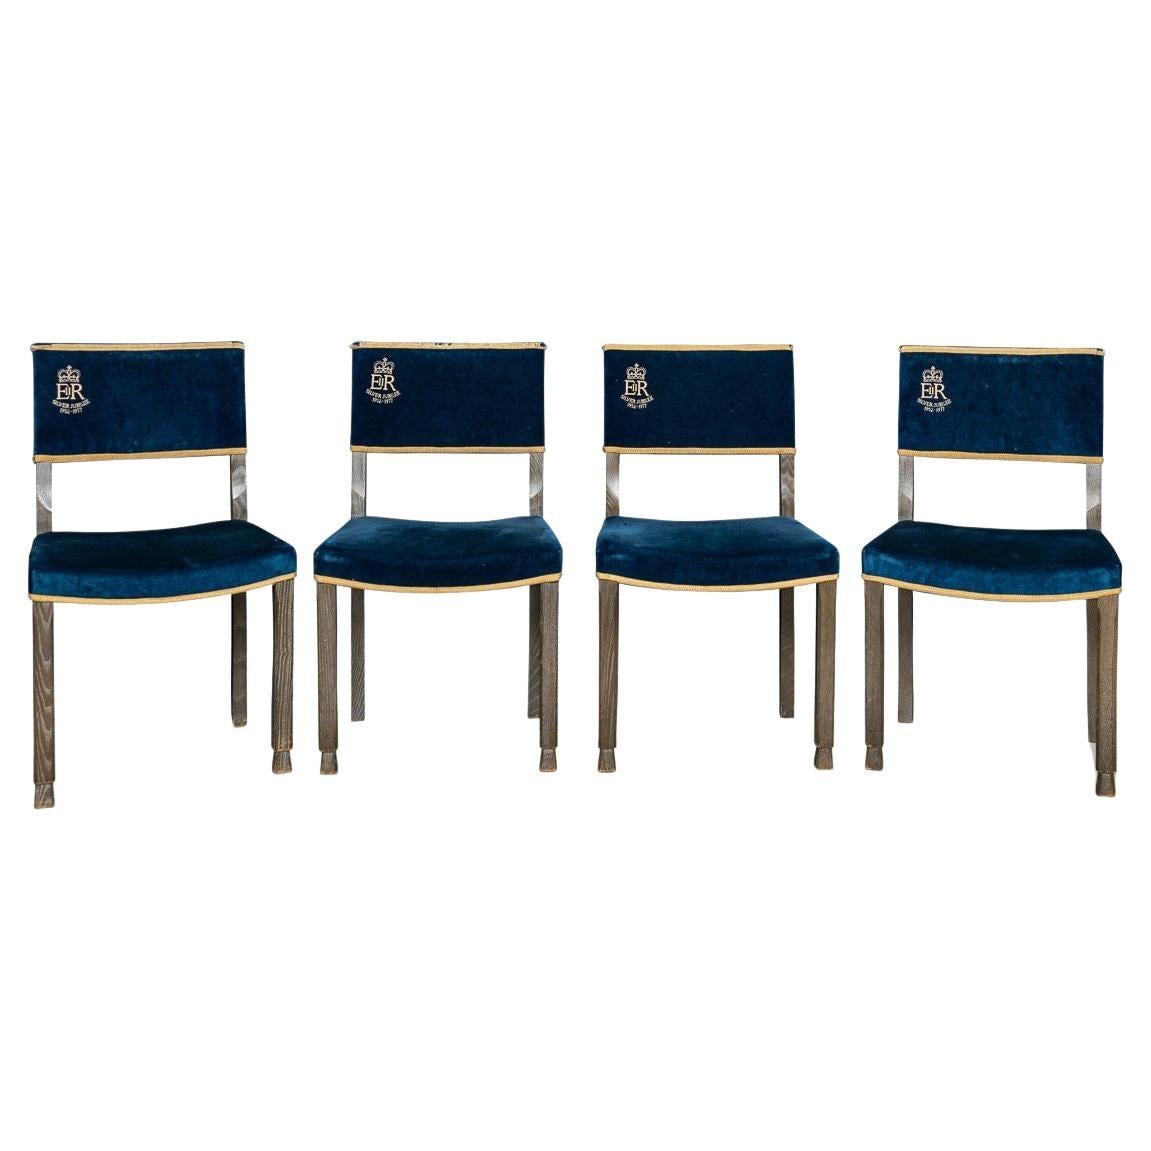 Set Of Four Silver Jubilee Commemorative Chairs By Hands Of Wycombe c.1977 For Sale